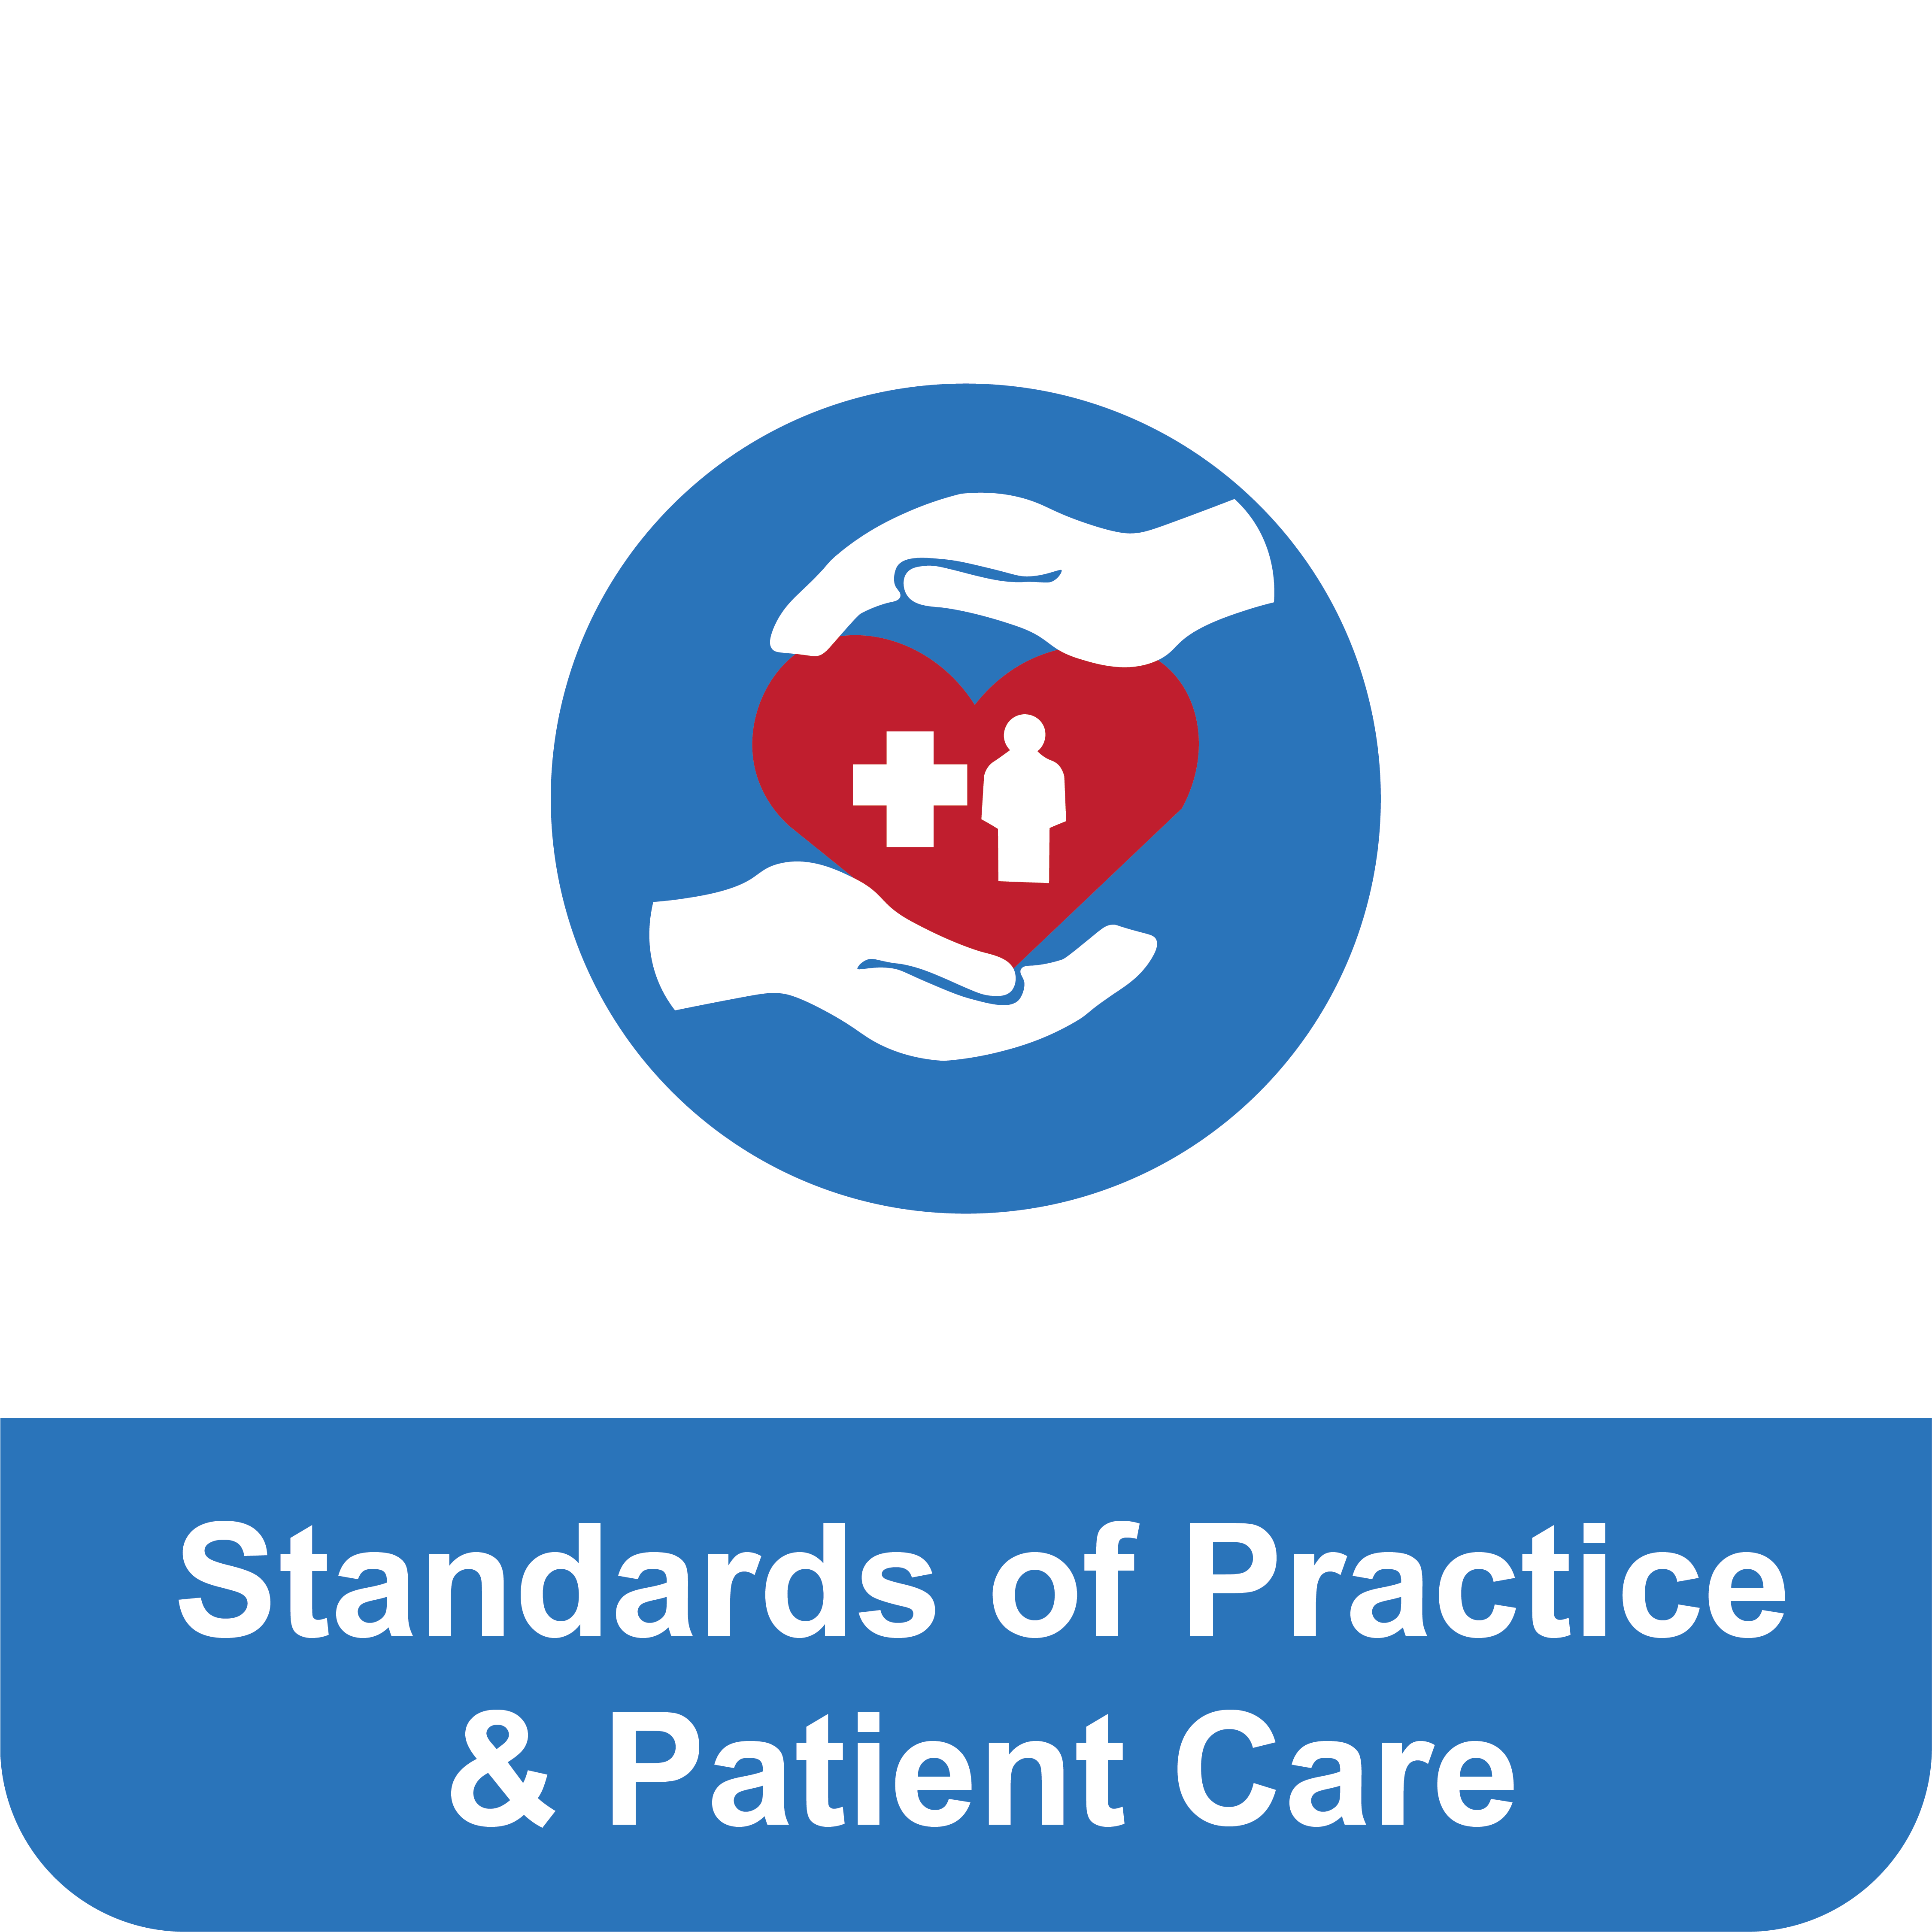 Tile that reads "Standards of Practice & Patient Care" under an icon of two hands holding a heart.